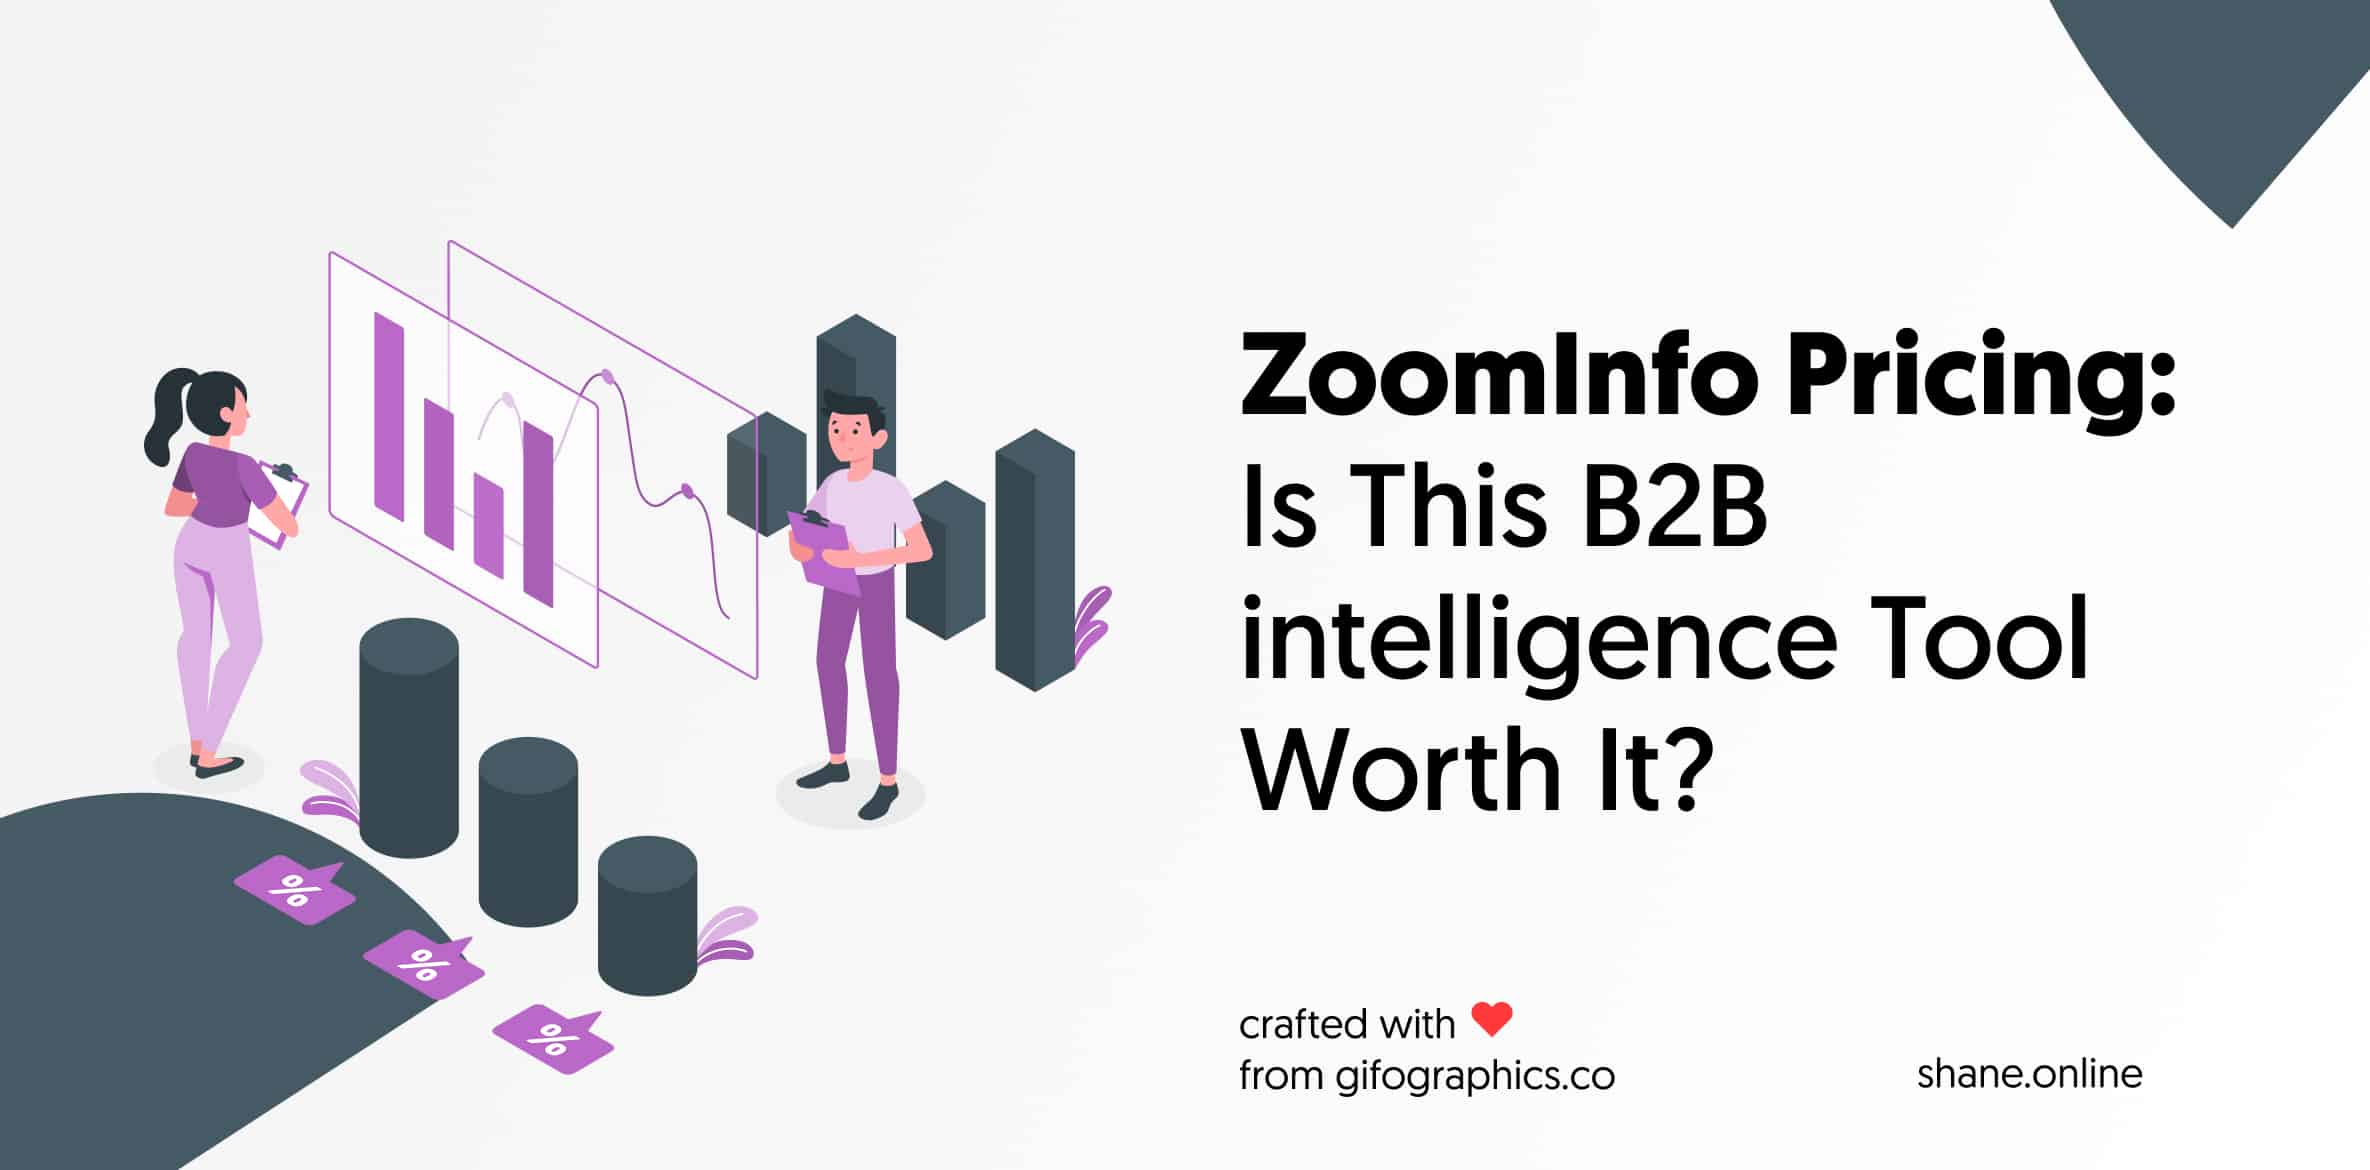 ZoomInfo Pricing Is This B2B intelligence Tool Worth It